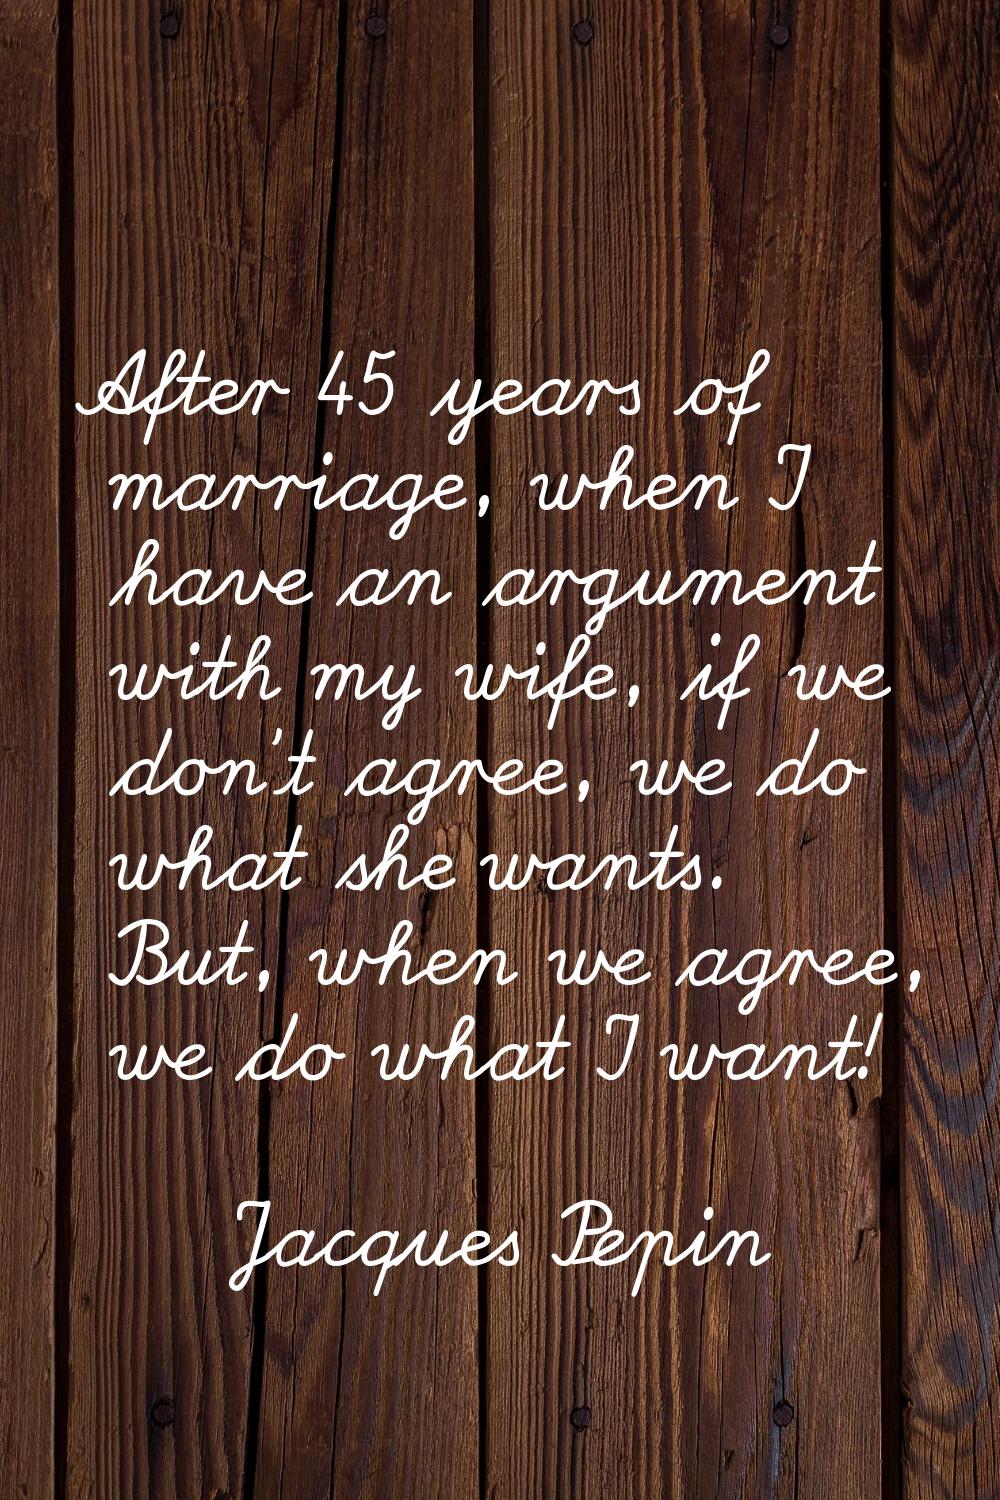 After 45 years of marriage, when I have an argument with my wife, if we don't agree, we do what she